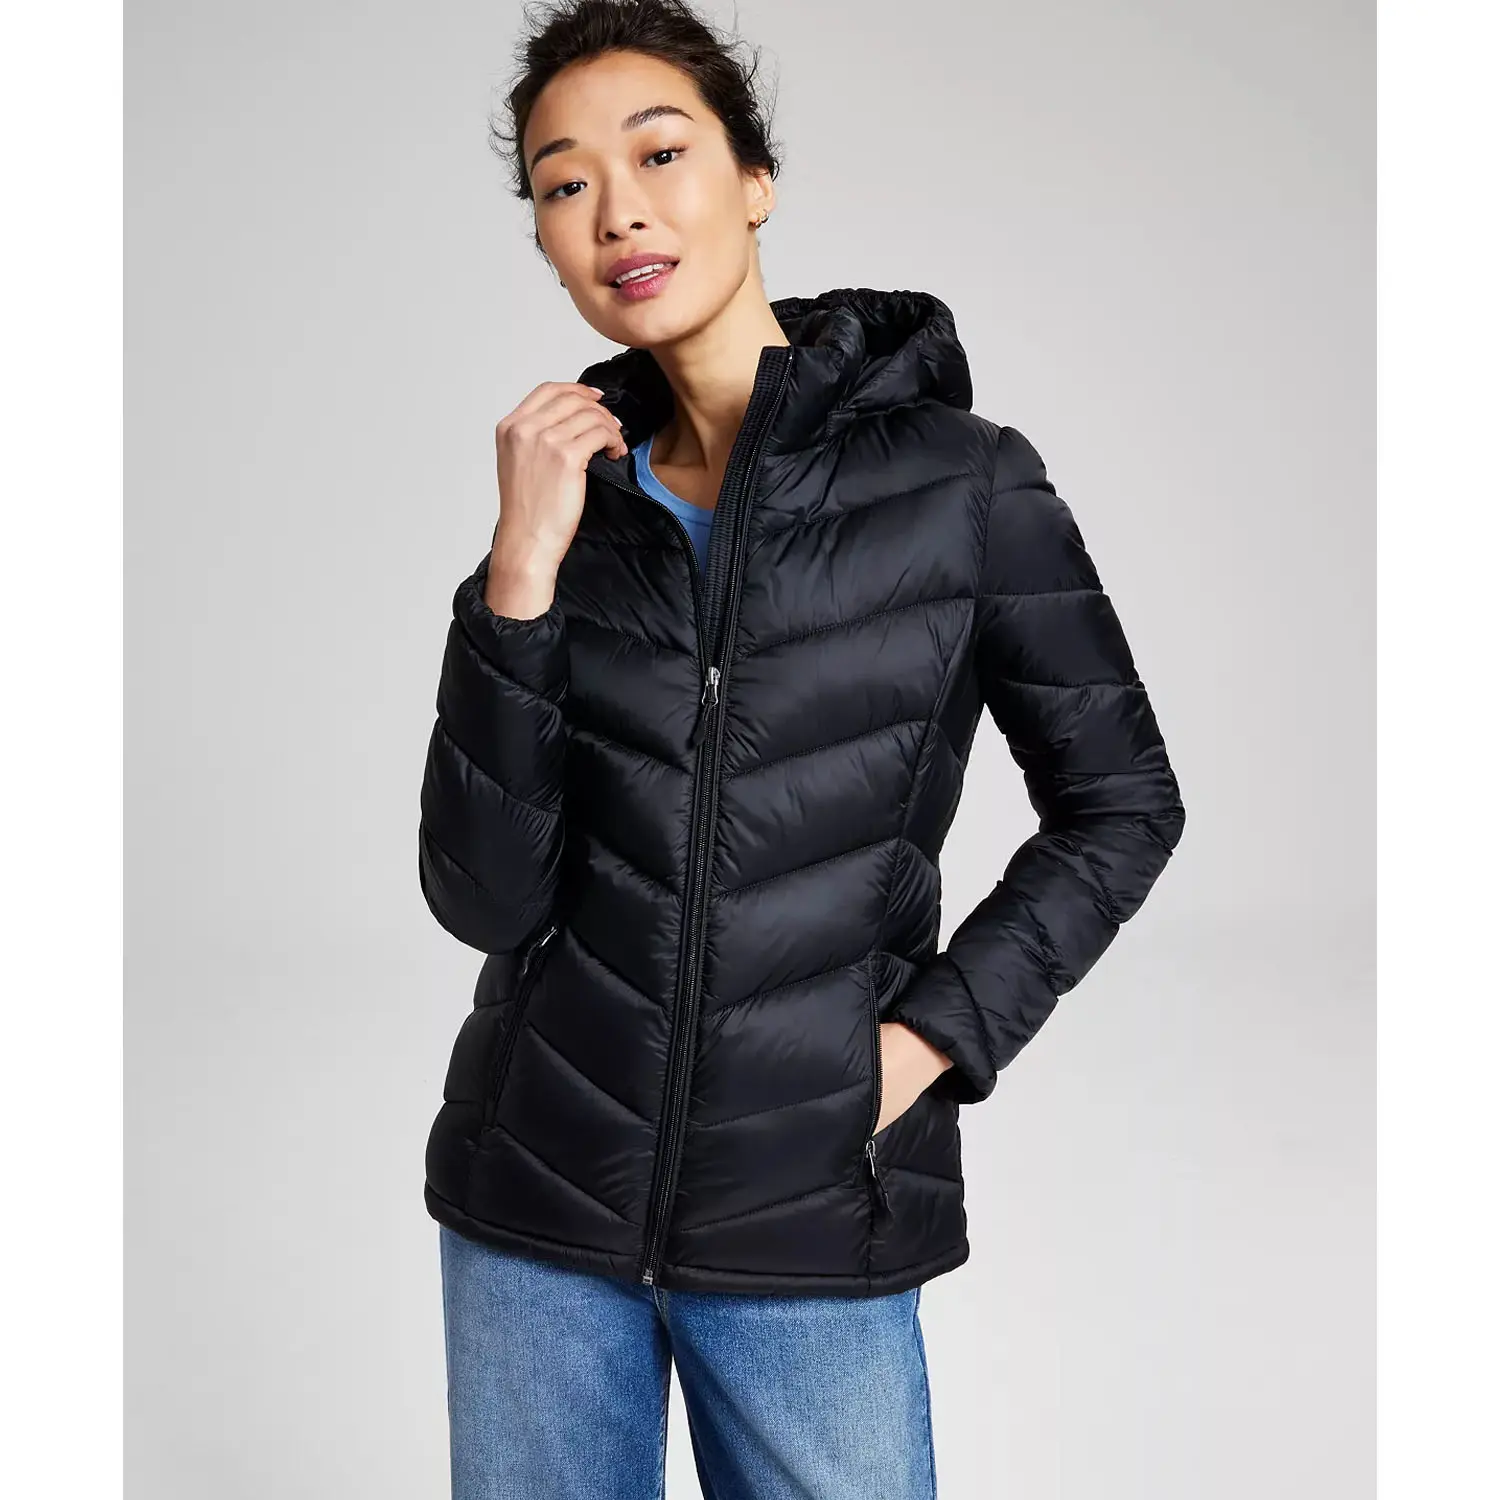 Leather Jacket Winter Thick Cotton Padded Coats Zipper Up Casual Stylish Plus Size Stand Collar Warm Coat